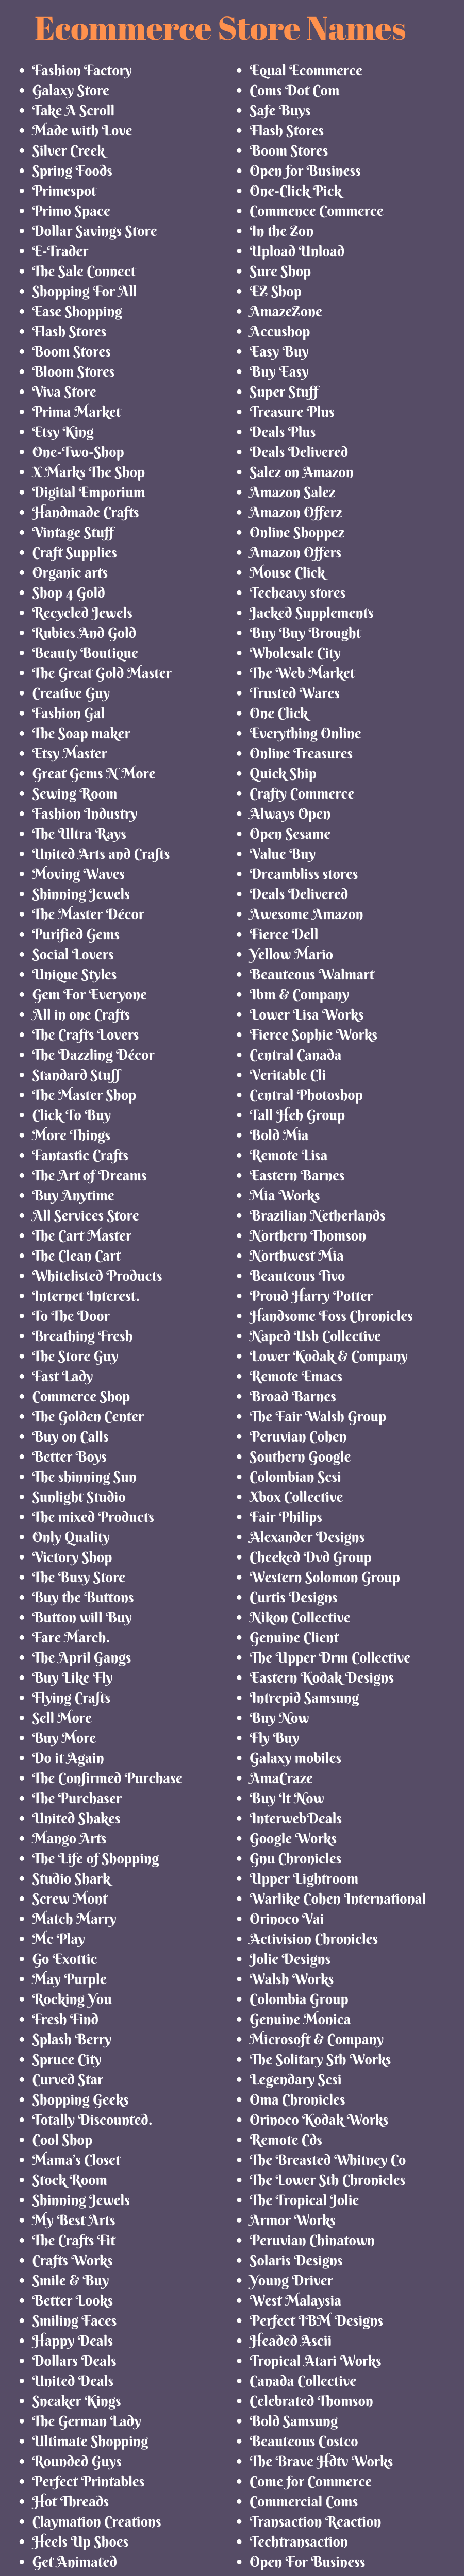 Ecommerce Store Names